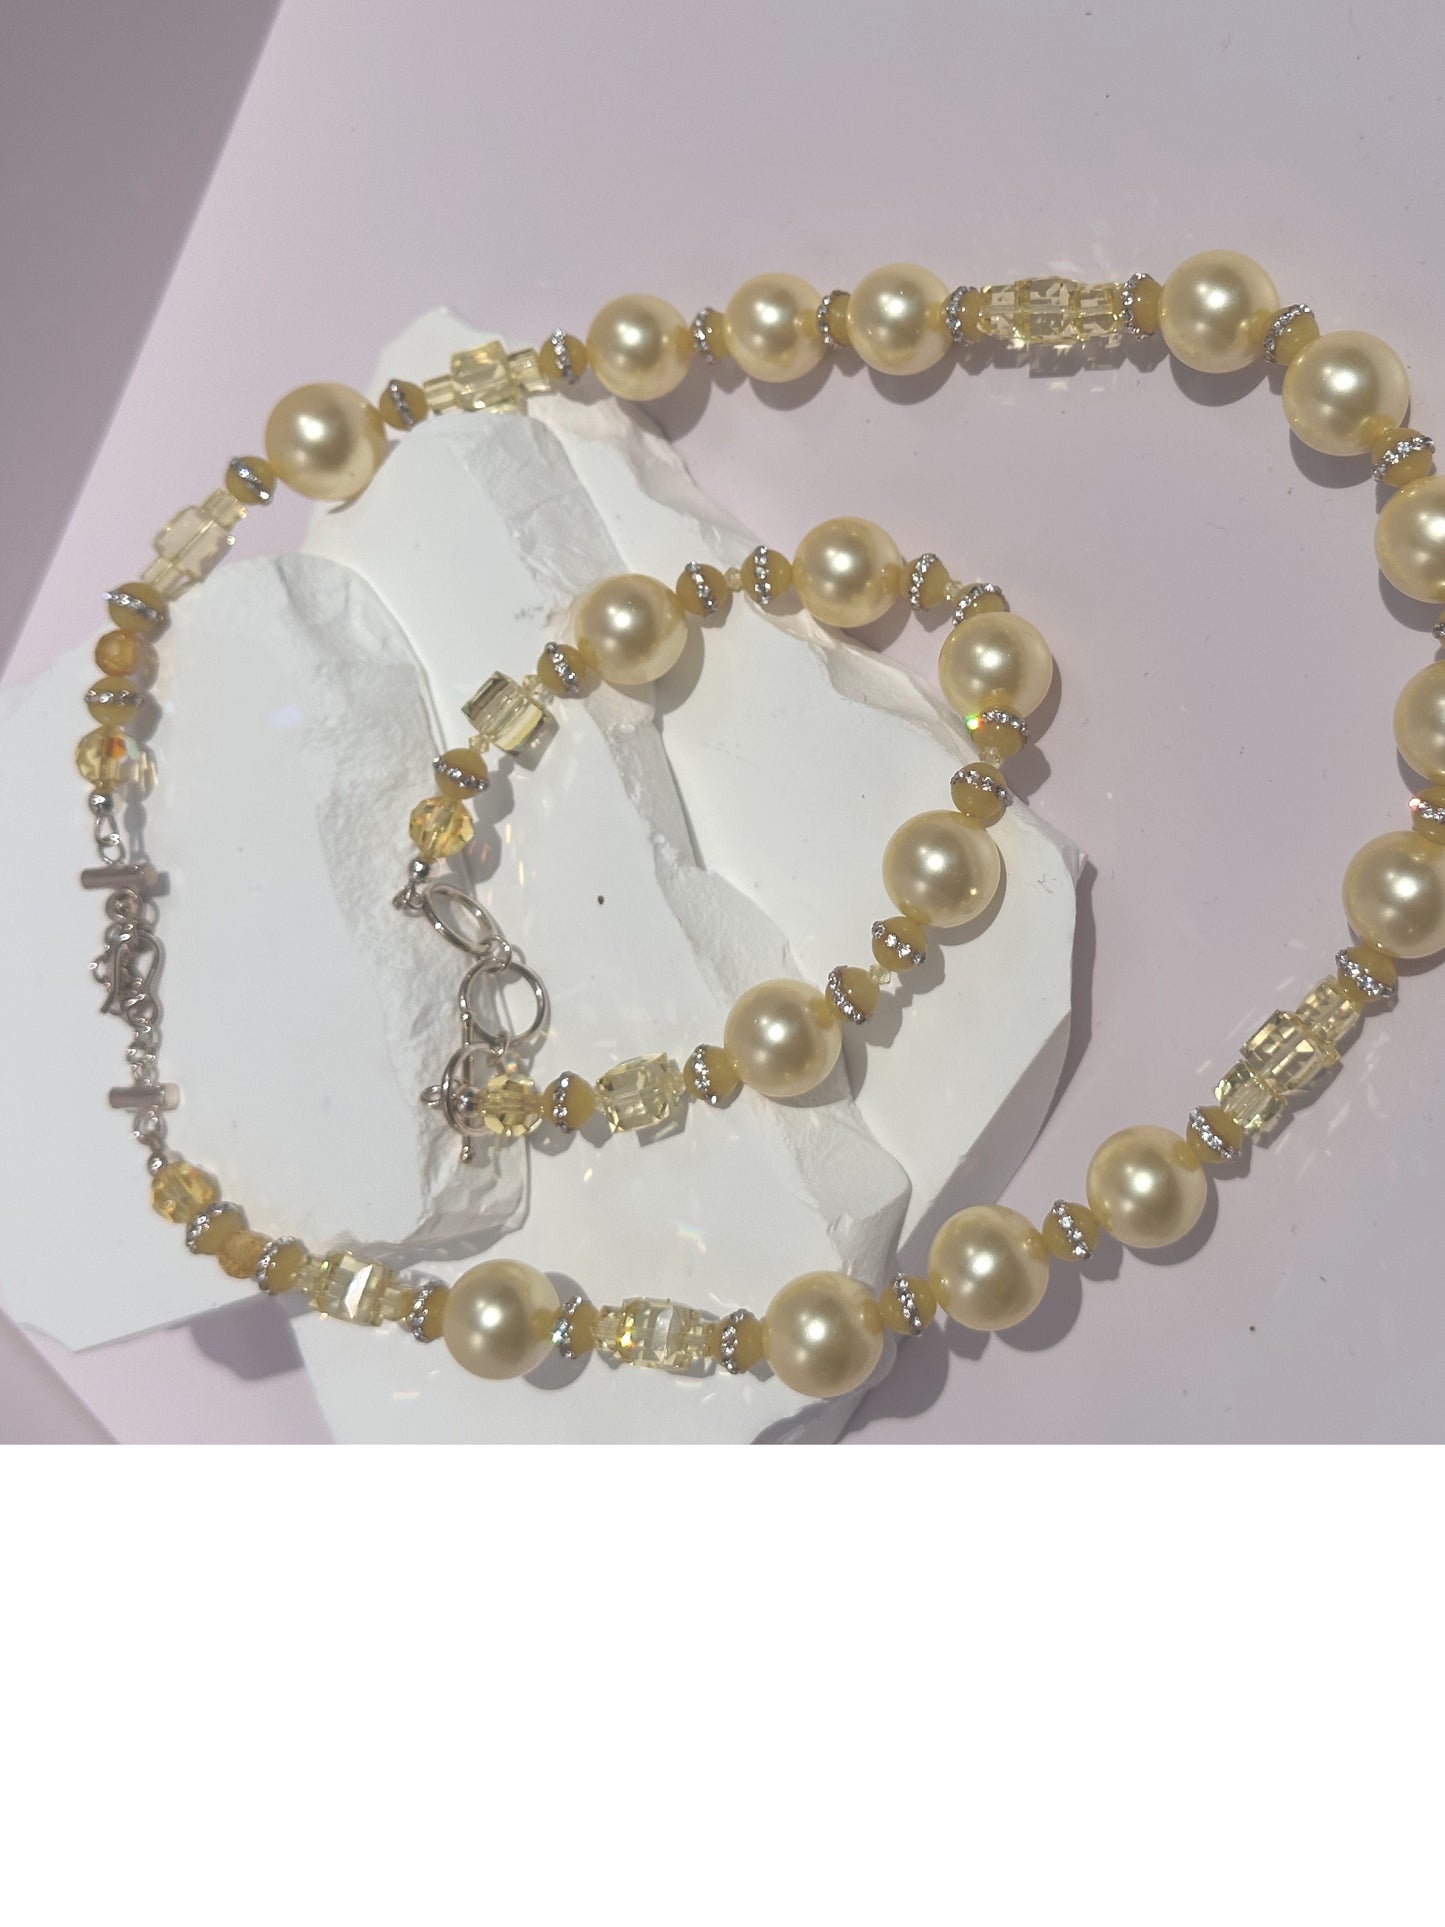 Yellow Natural Pearls & Yellow Jade Necklace w/Earrings included